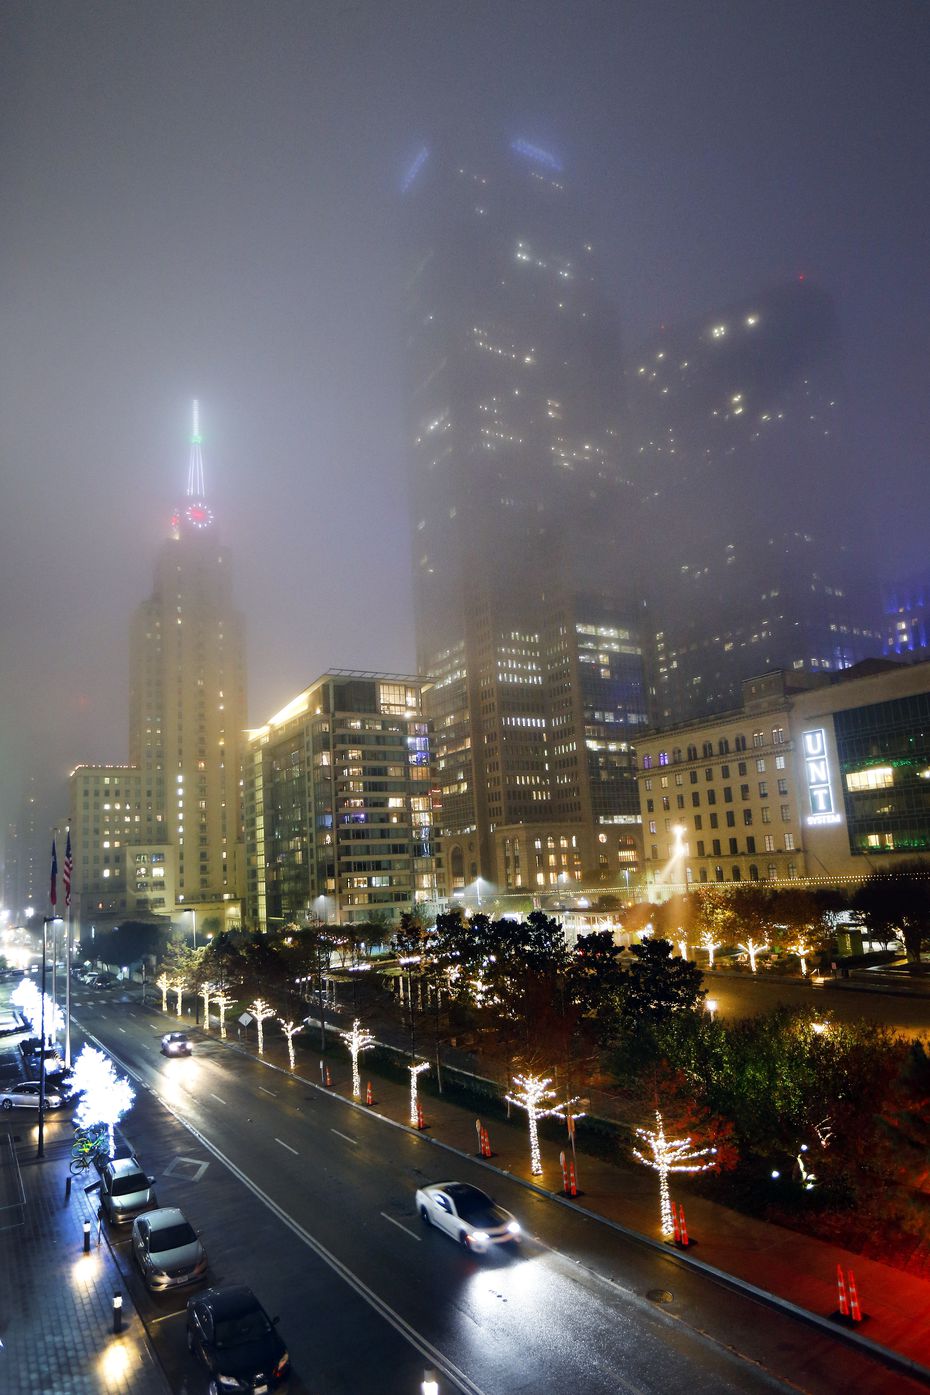 Fog settled over the historic Mercantile Building (left) and Comerica Bank Tower (center)...